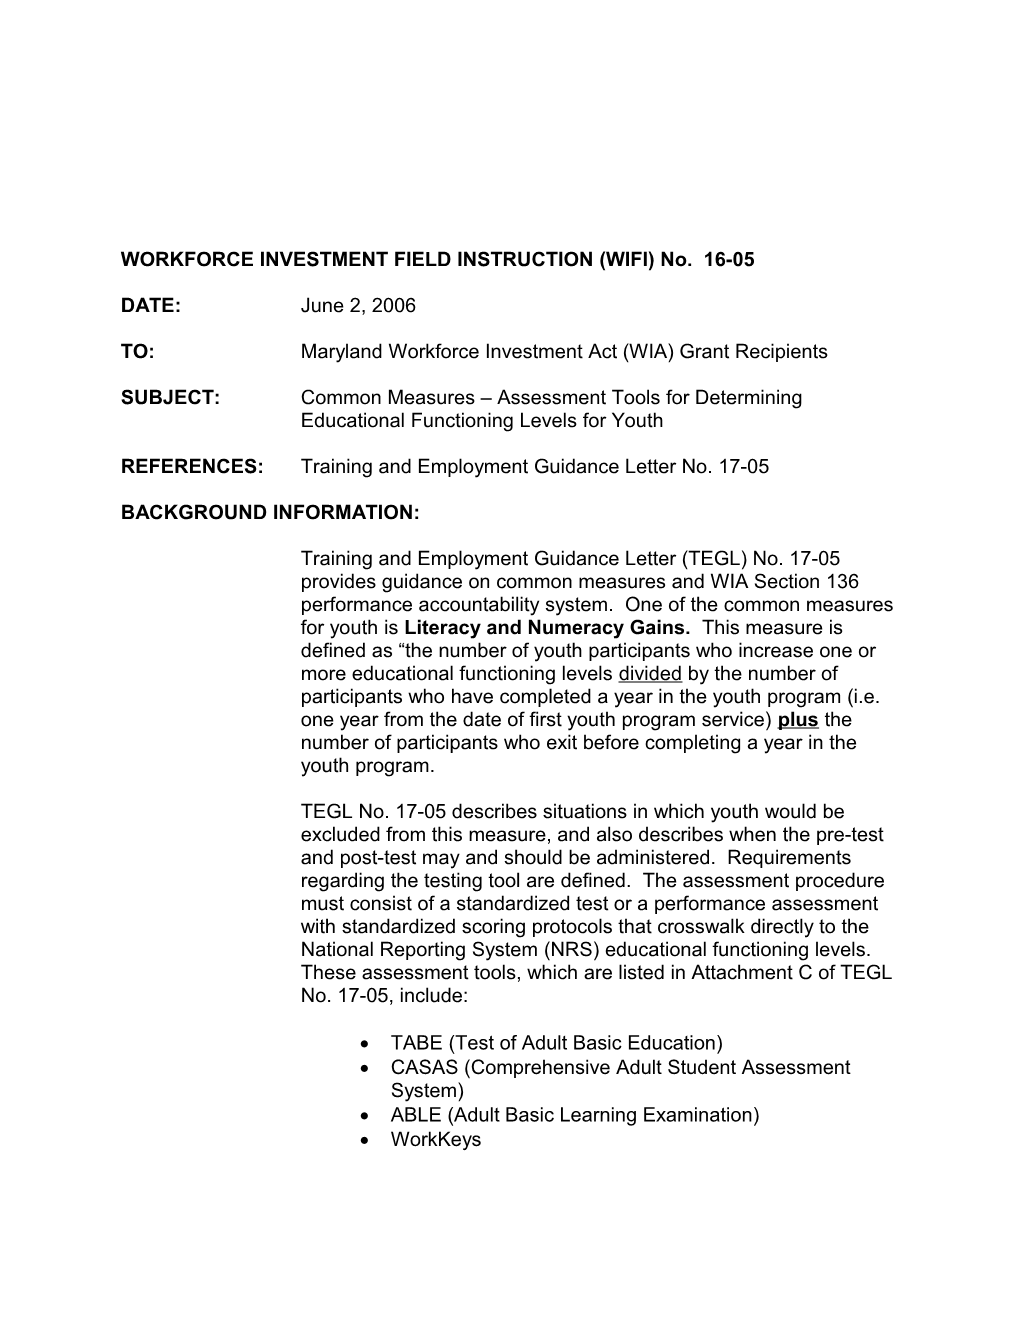 WORKFORCE INVESTMENT FIELD INSTRUCTION (WIFI) No s4